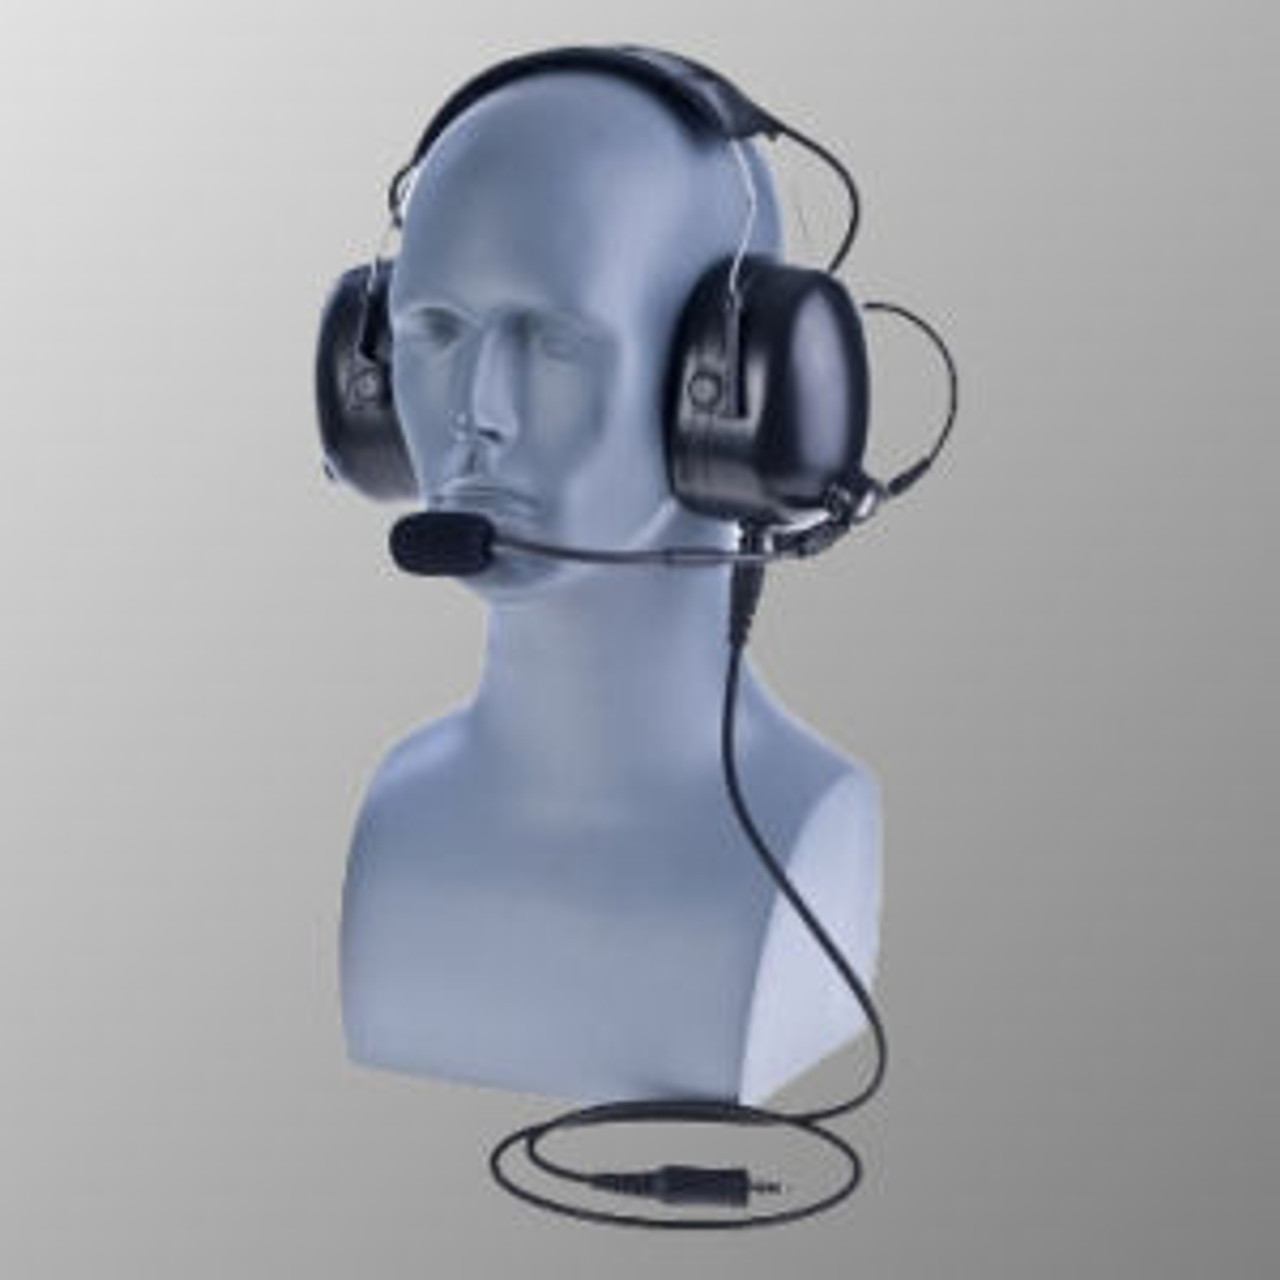 EF Johnson VP5330 Over The Head Double Muff Headset With WIreless PTT